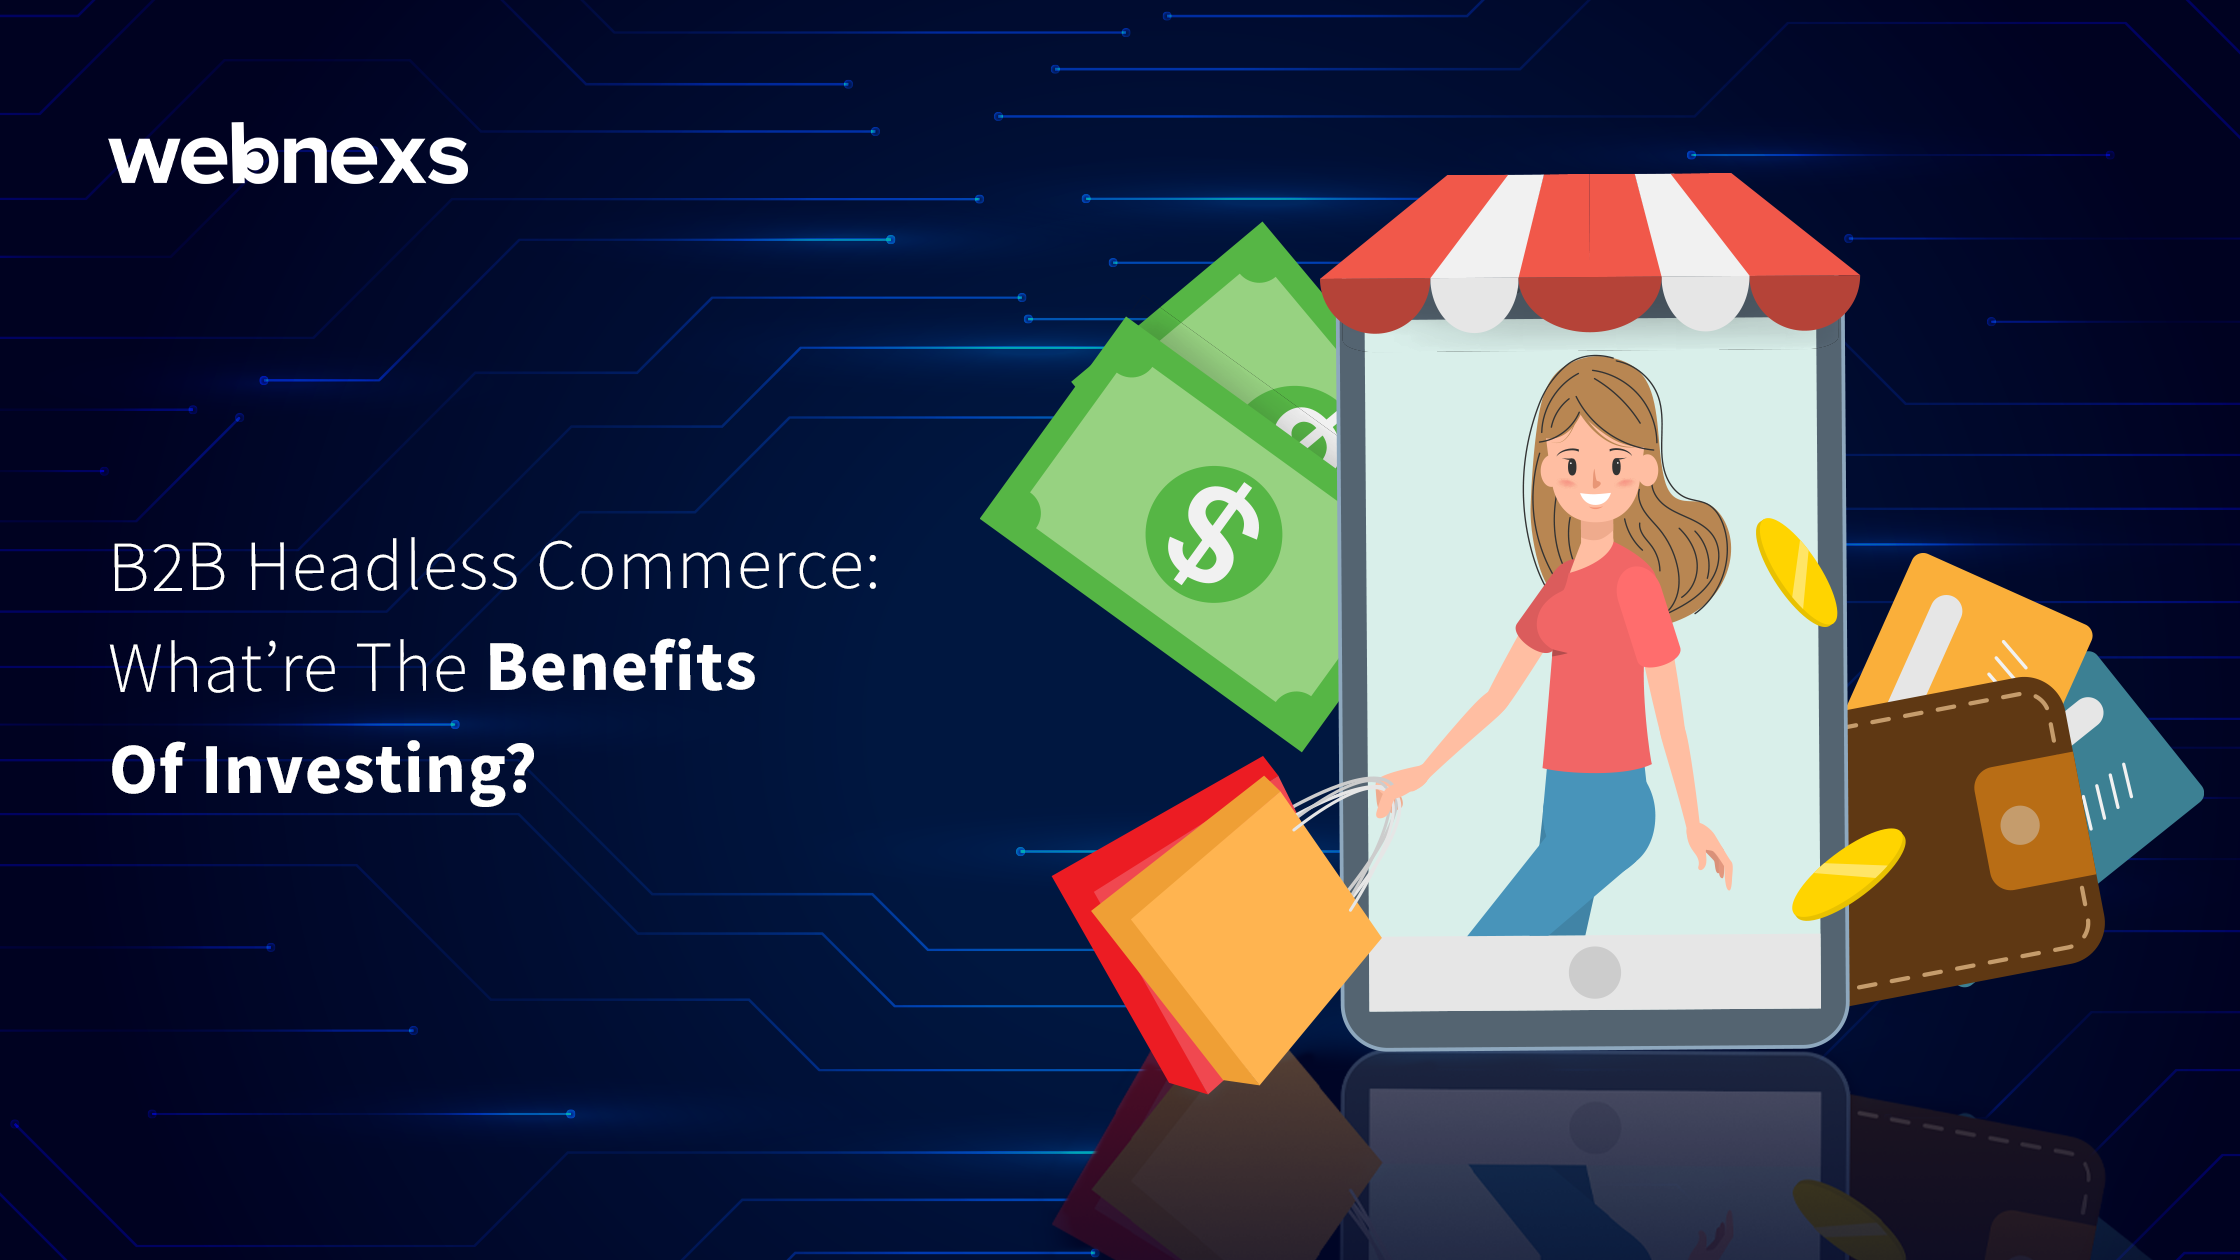 B2B Headless Commerce: What're The Benefits Of Investing? | Webnexs